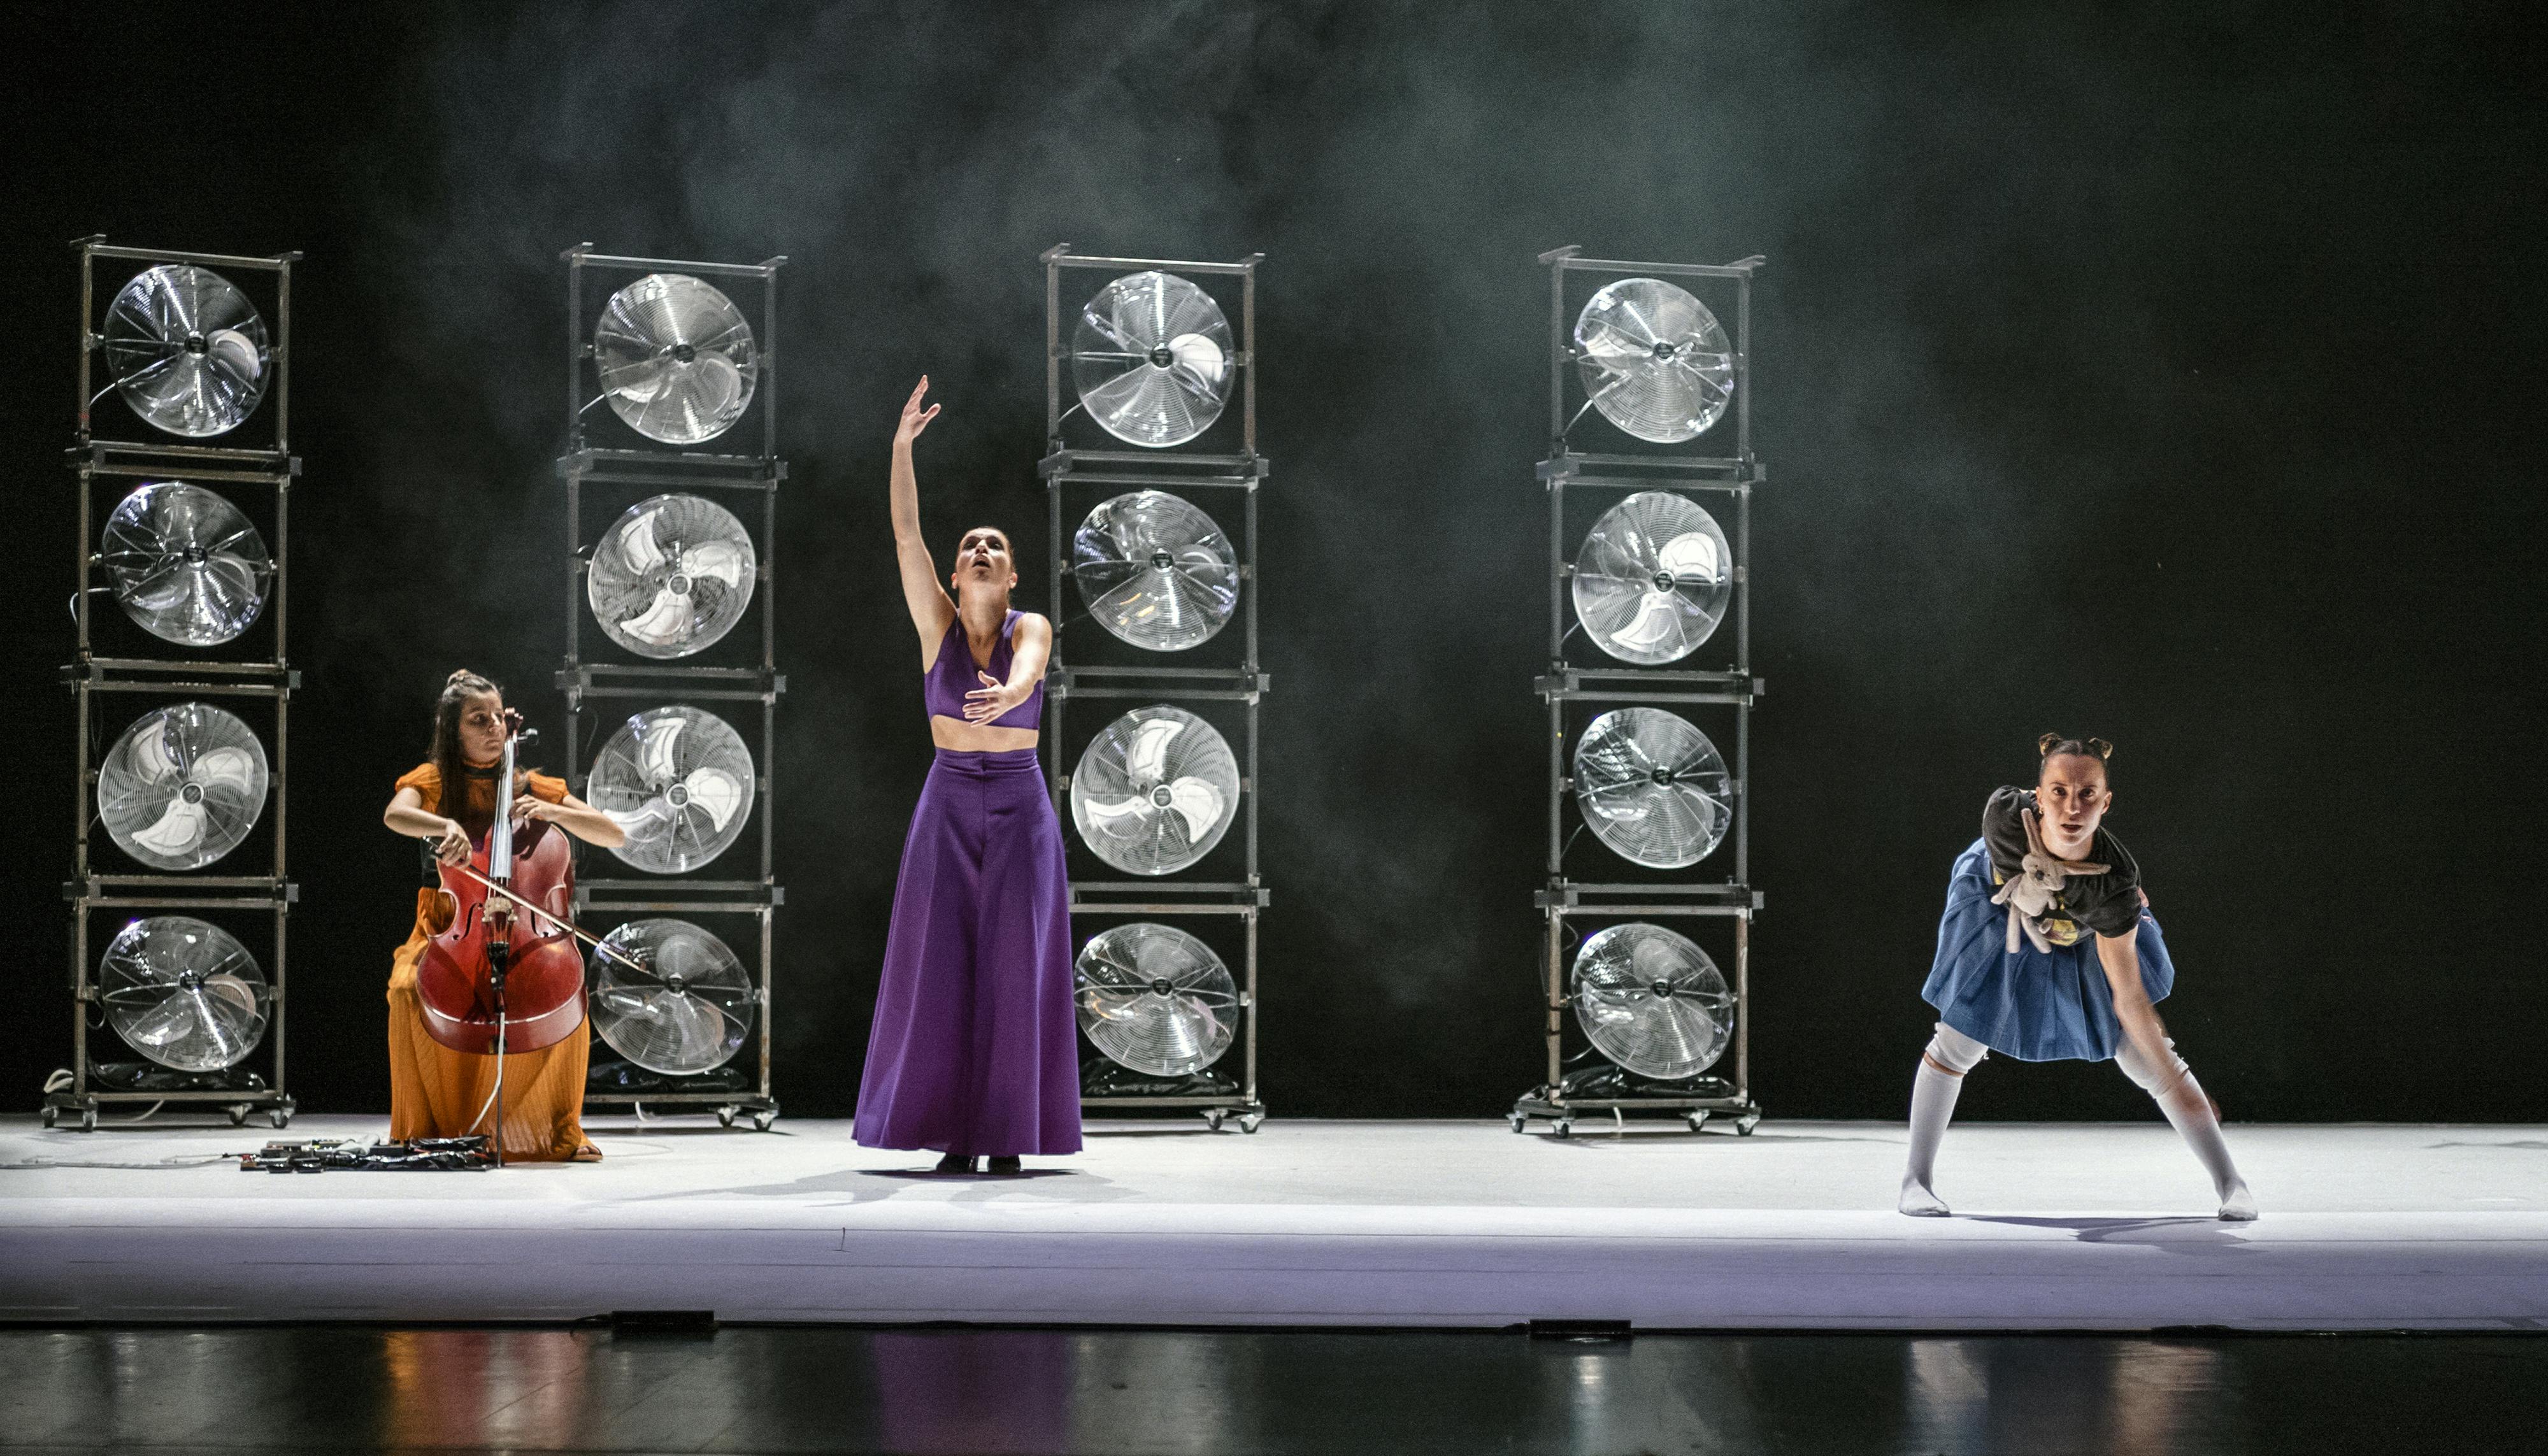 The three YouMe performers (a cellist, a flamenco dancer and a hip hop dancer) during the performance. Behind them four pillars made of fans stacked together and some stage smoke in the dark background.